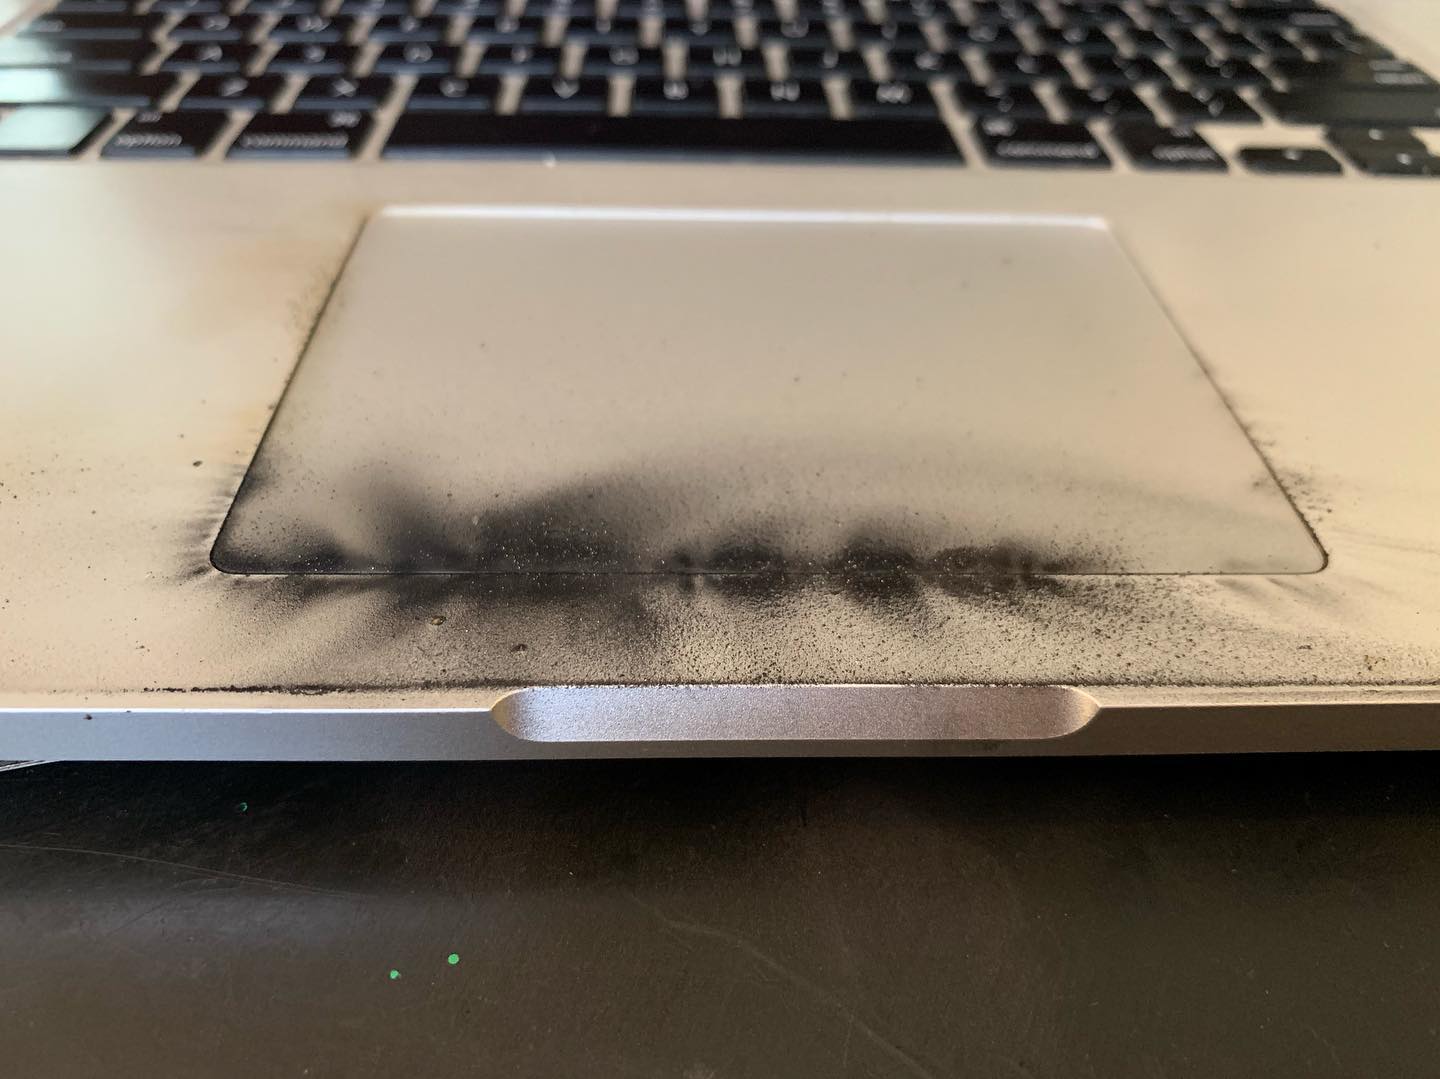 macbook pro 15 inch exploded burnt battery